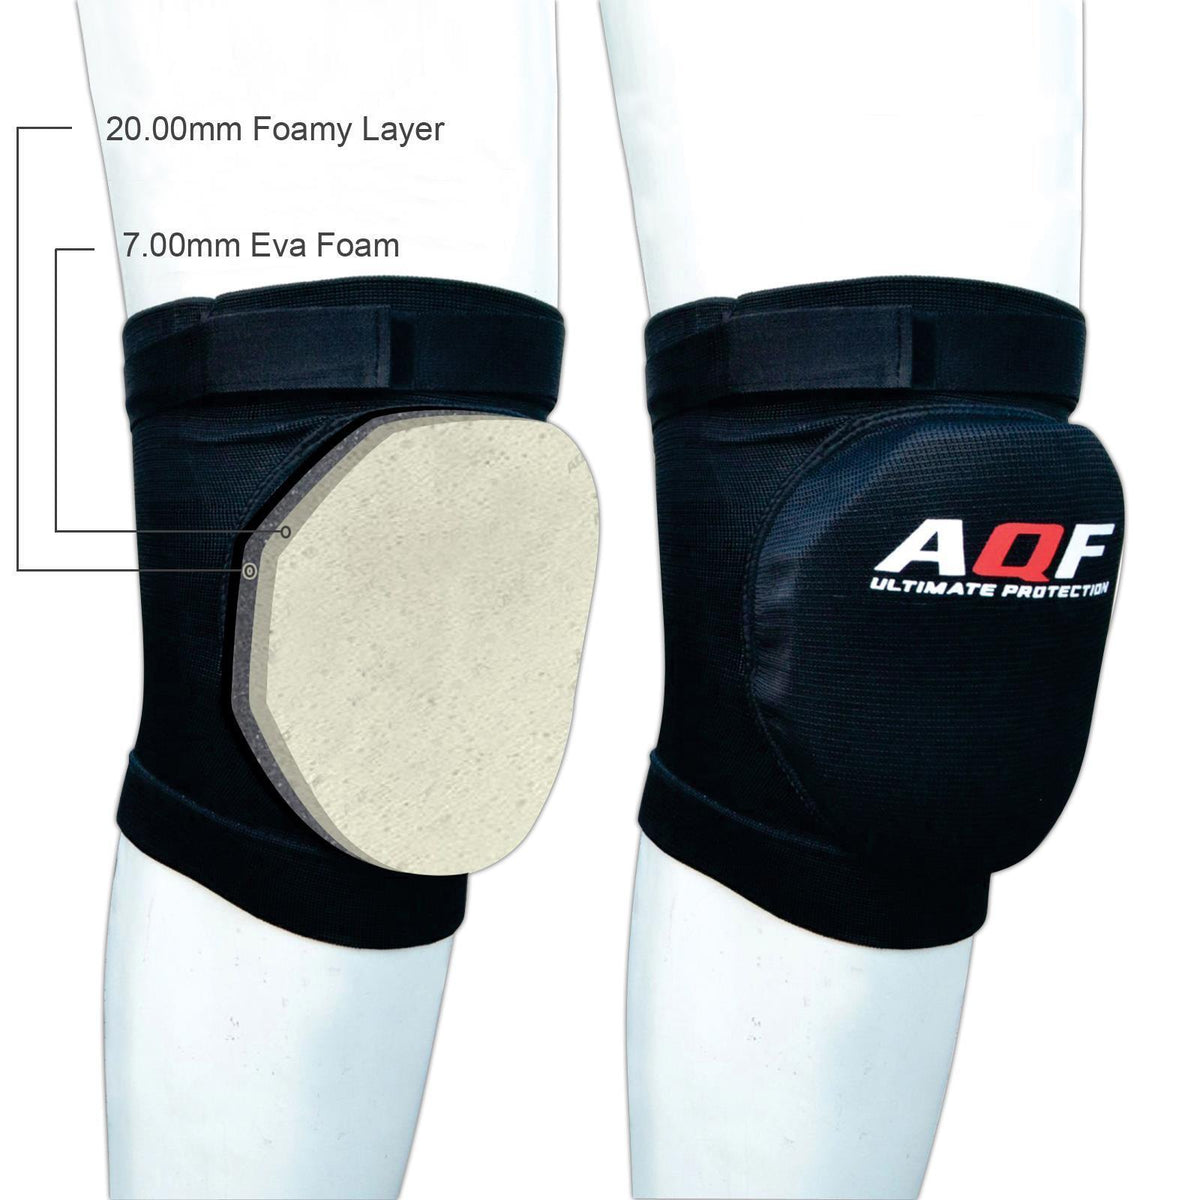 Best Knee Support for Arthritis UK - Knee Pads Brace Protector Caps Support Pad Guards